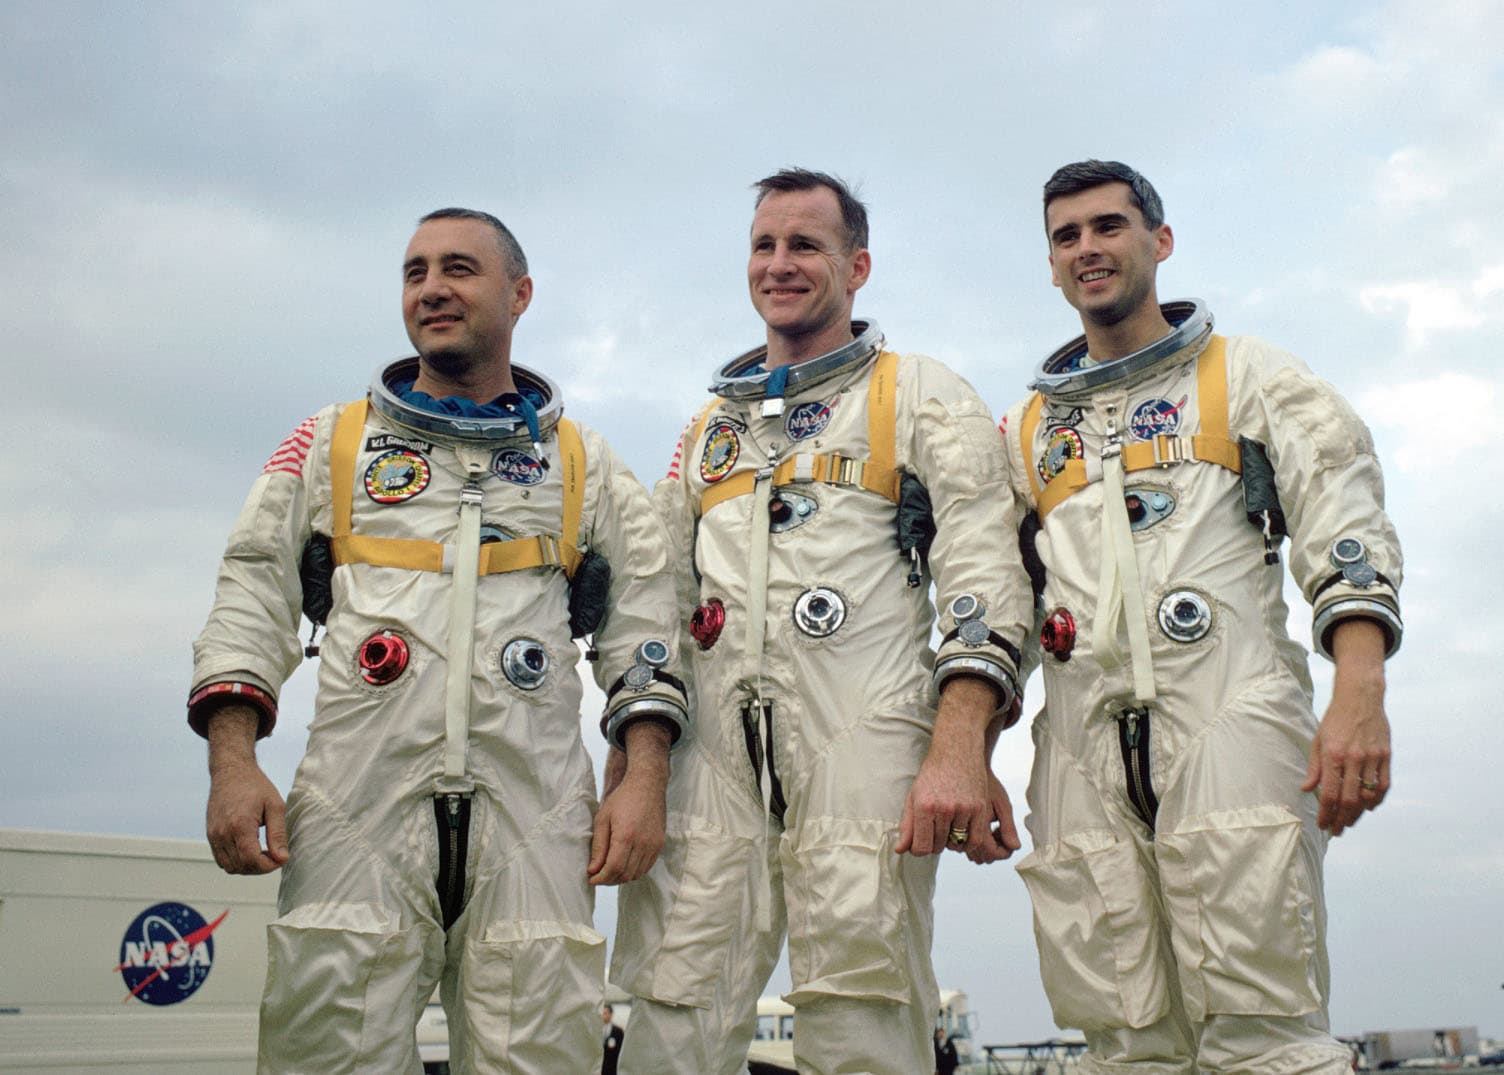 Apollo 1 Crew The crew included (L-R) Gus Grissom, Ed White and Roger Chaffee.  NASA